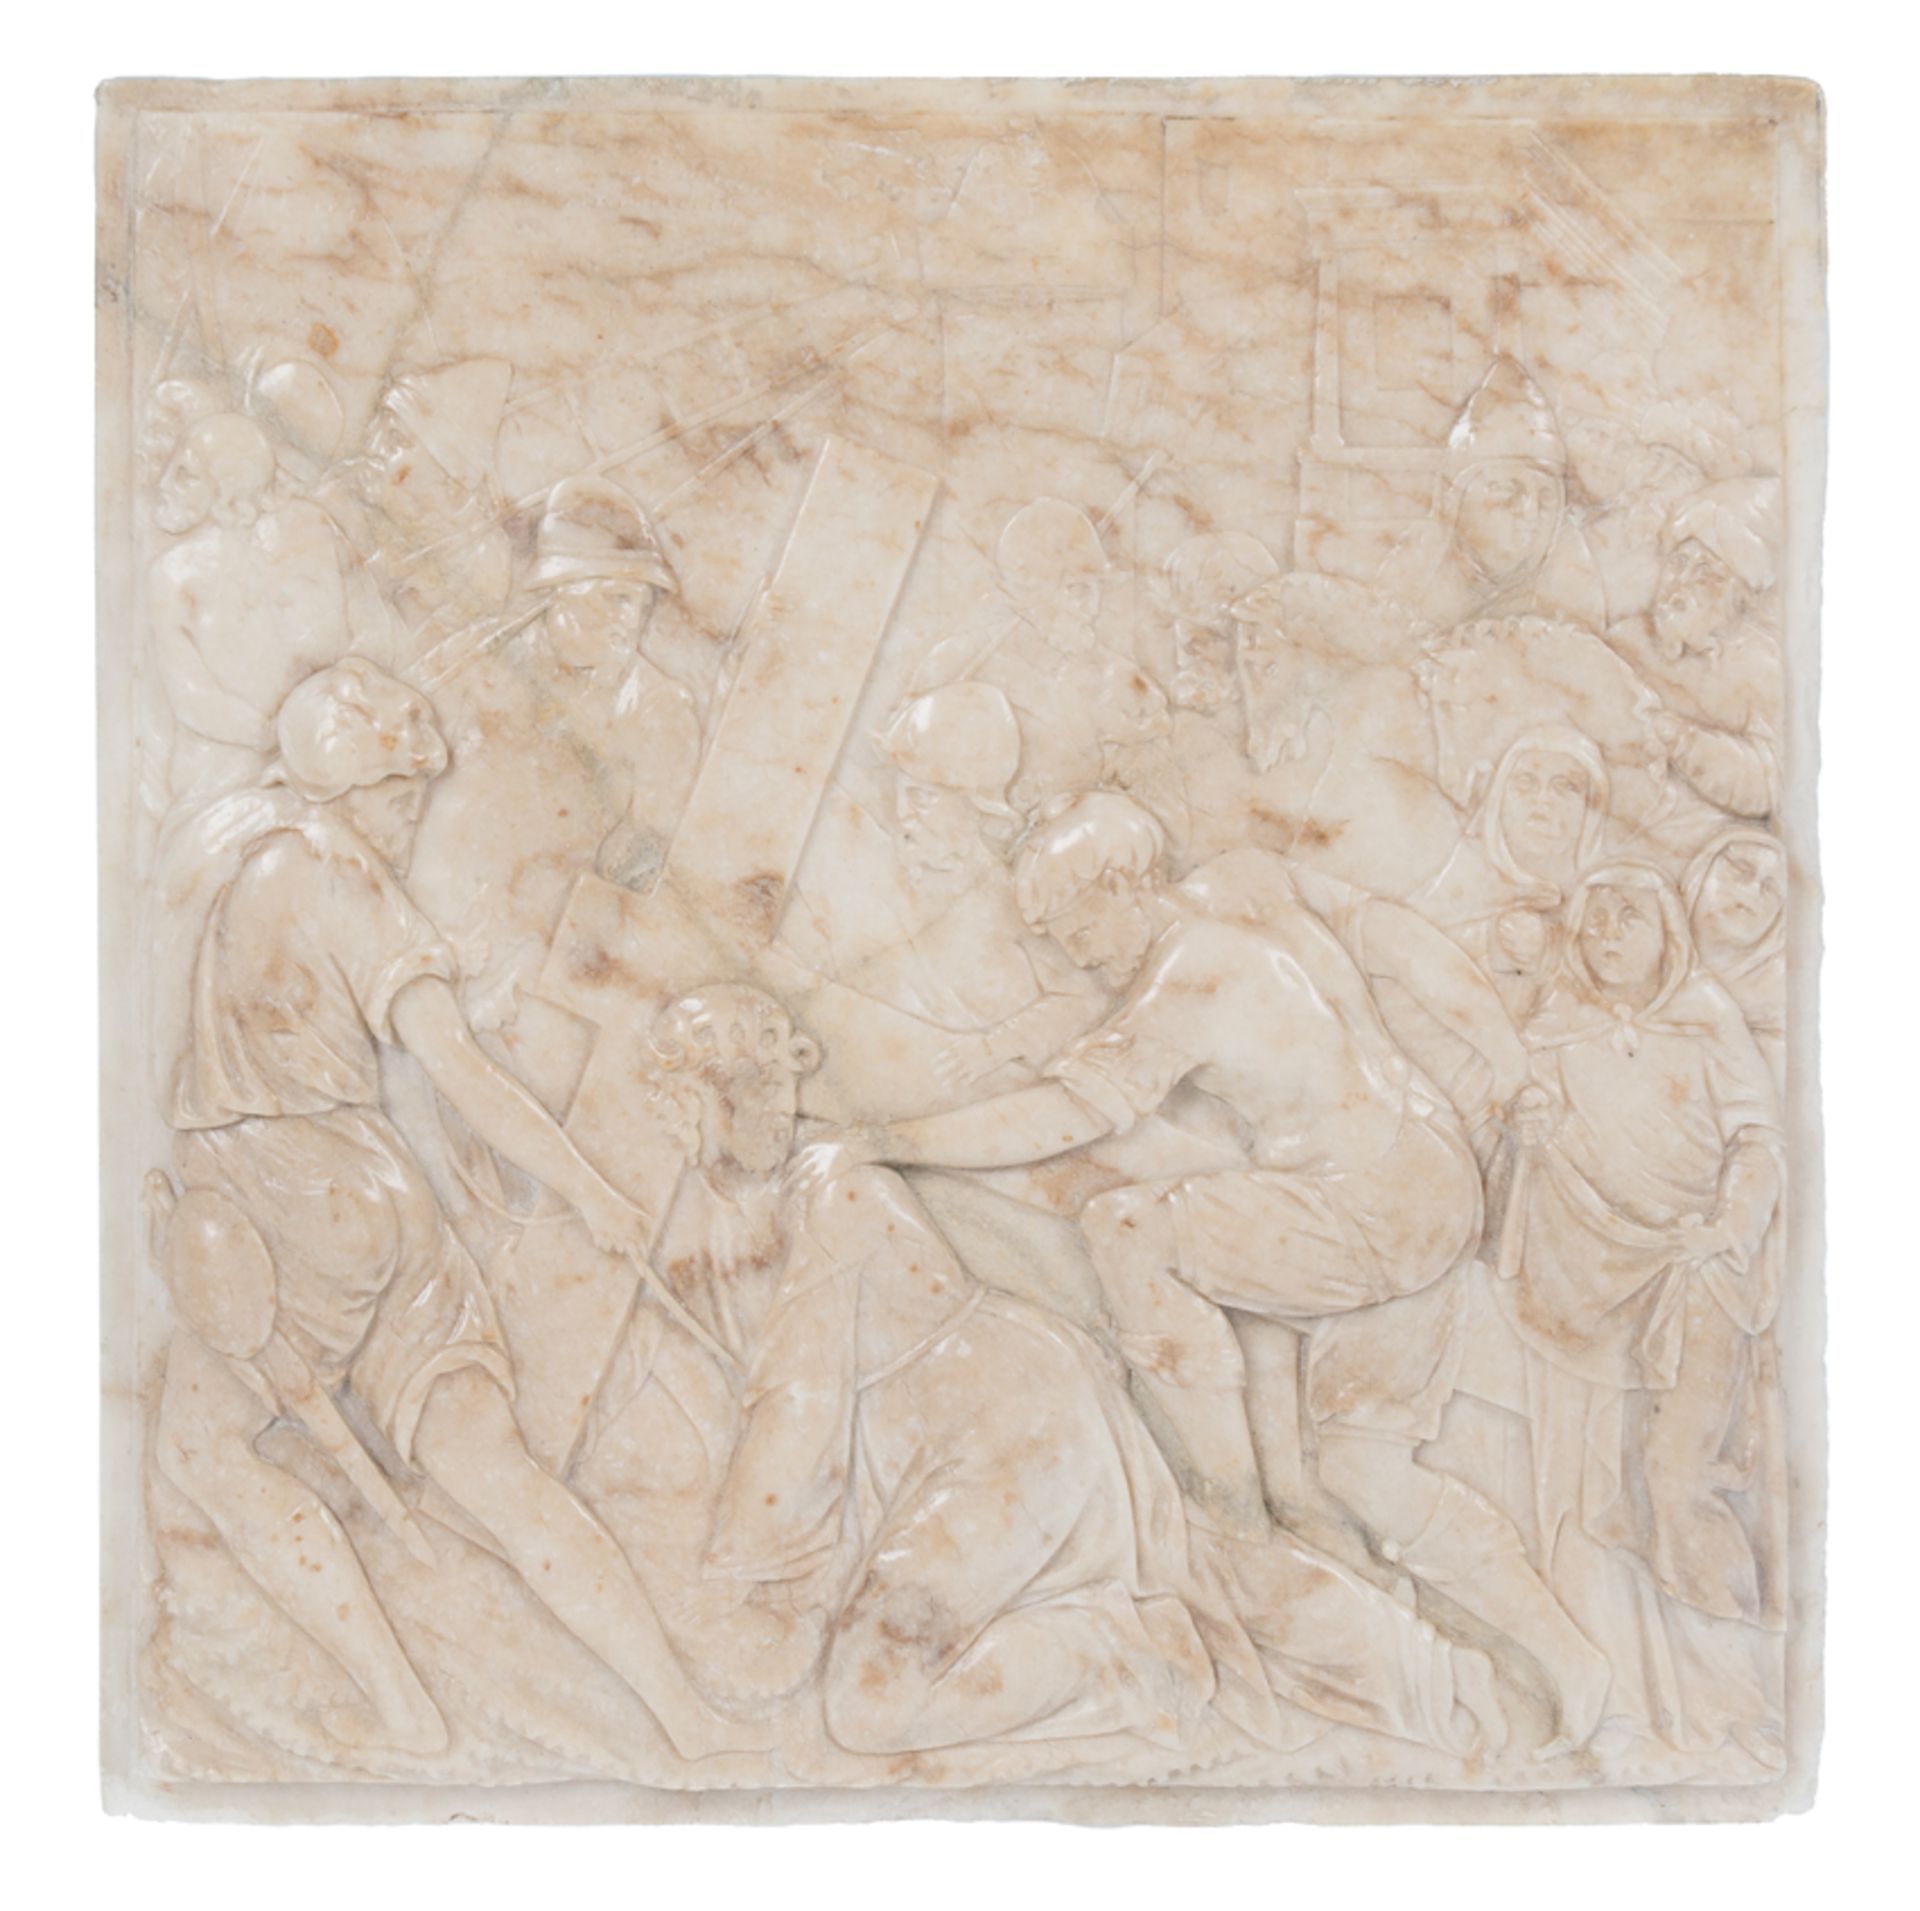 "Christ falls on the way to Calvary". Marble relief. Spanish or Italian School. Renaissance. 16th ce